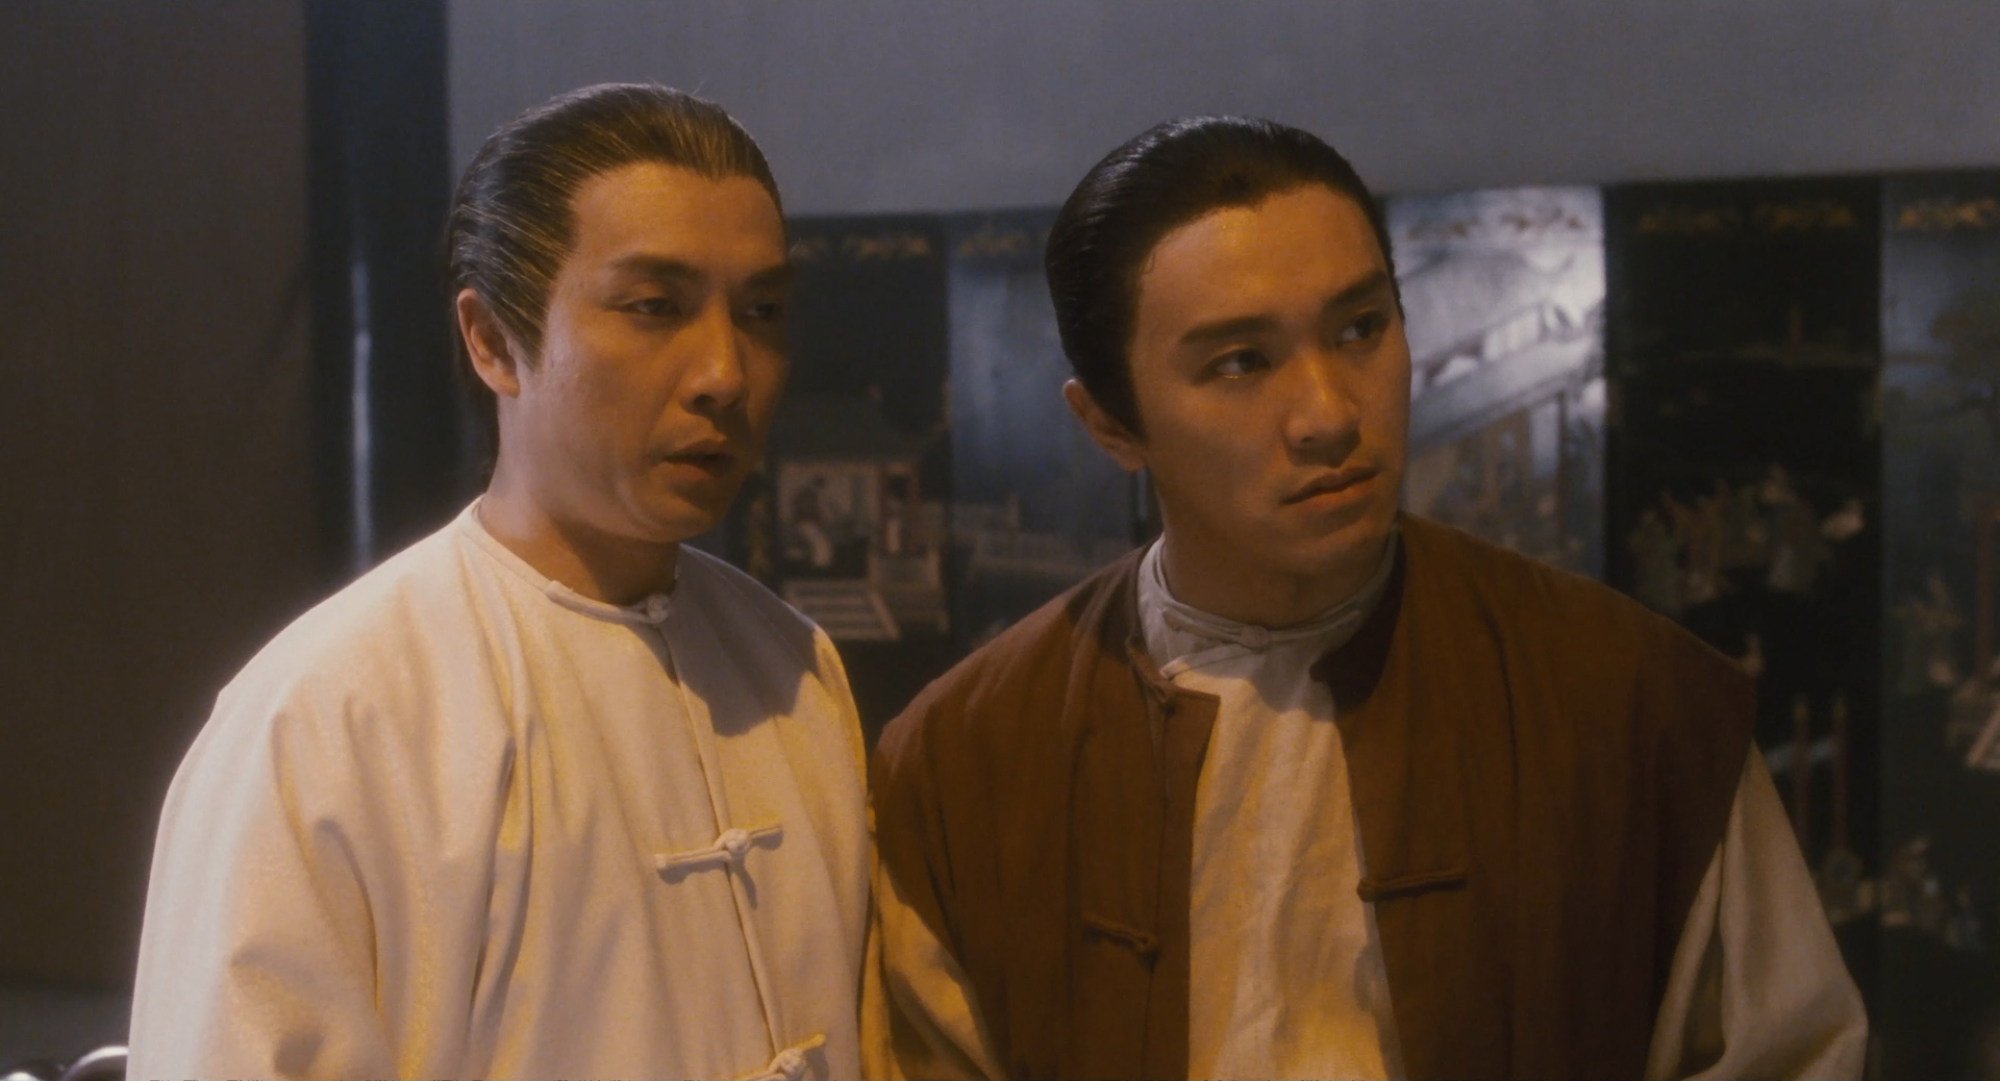 Costume martial arts meets slapstick comedy in Stephen Chow and Wong ...